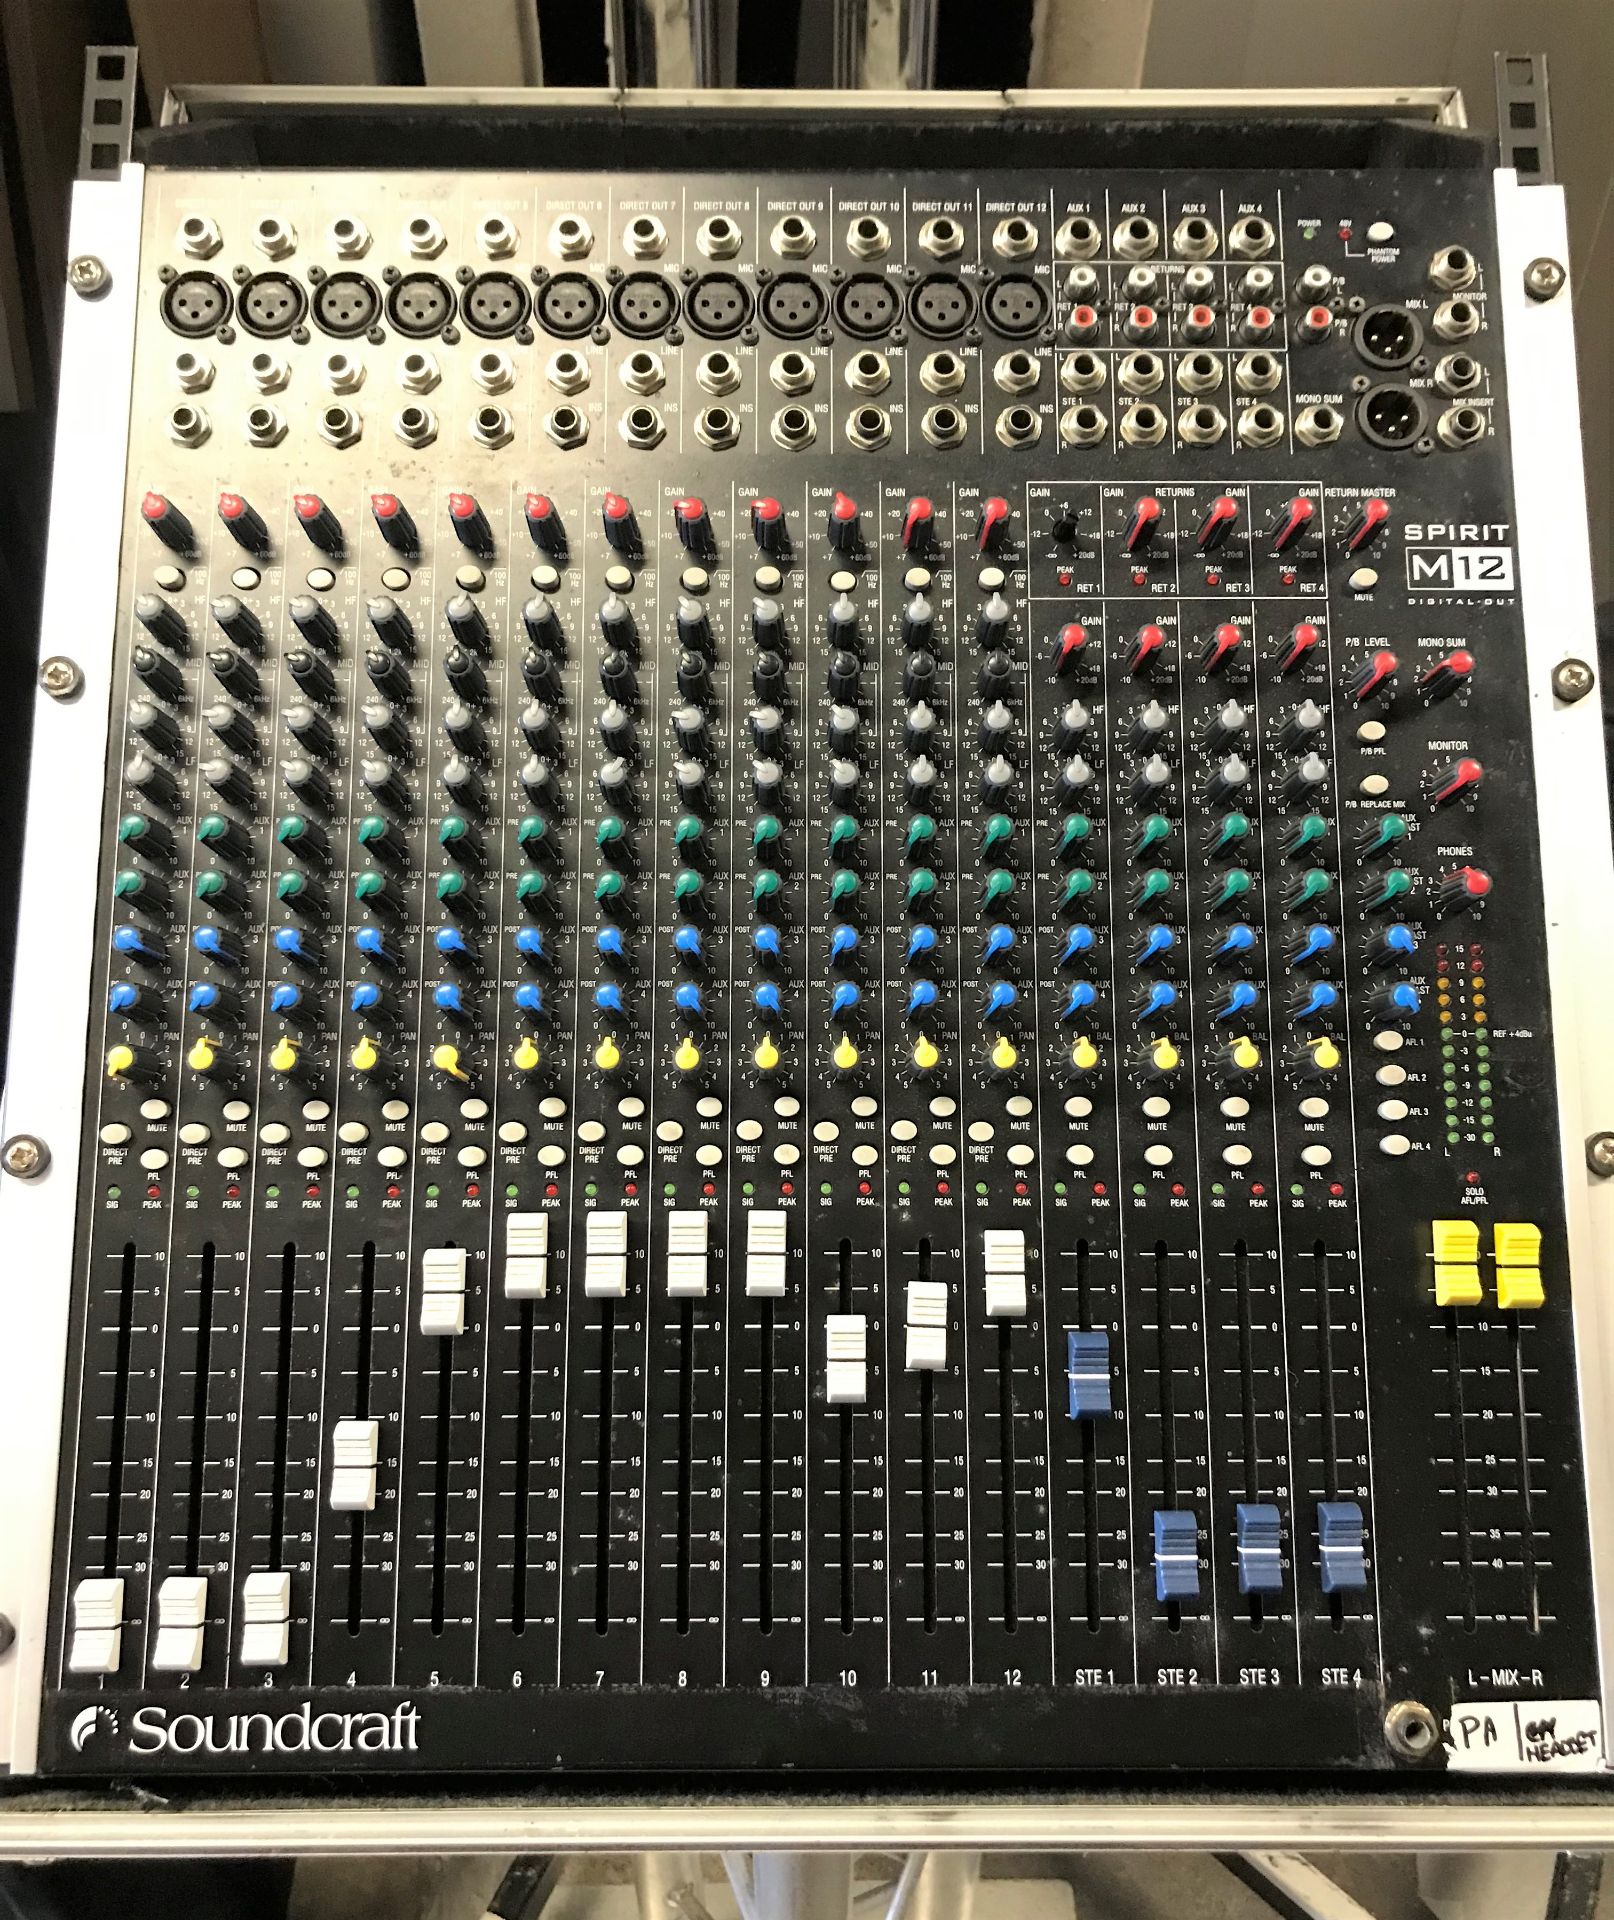 A Soundcraft Spirit M12 12 channel Sound Mixing Desk with Road Ready Flight Case, 530mm x 640mm x